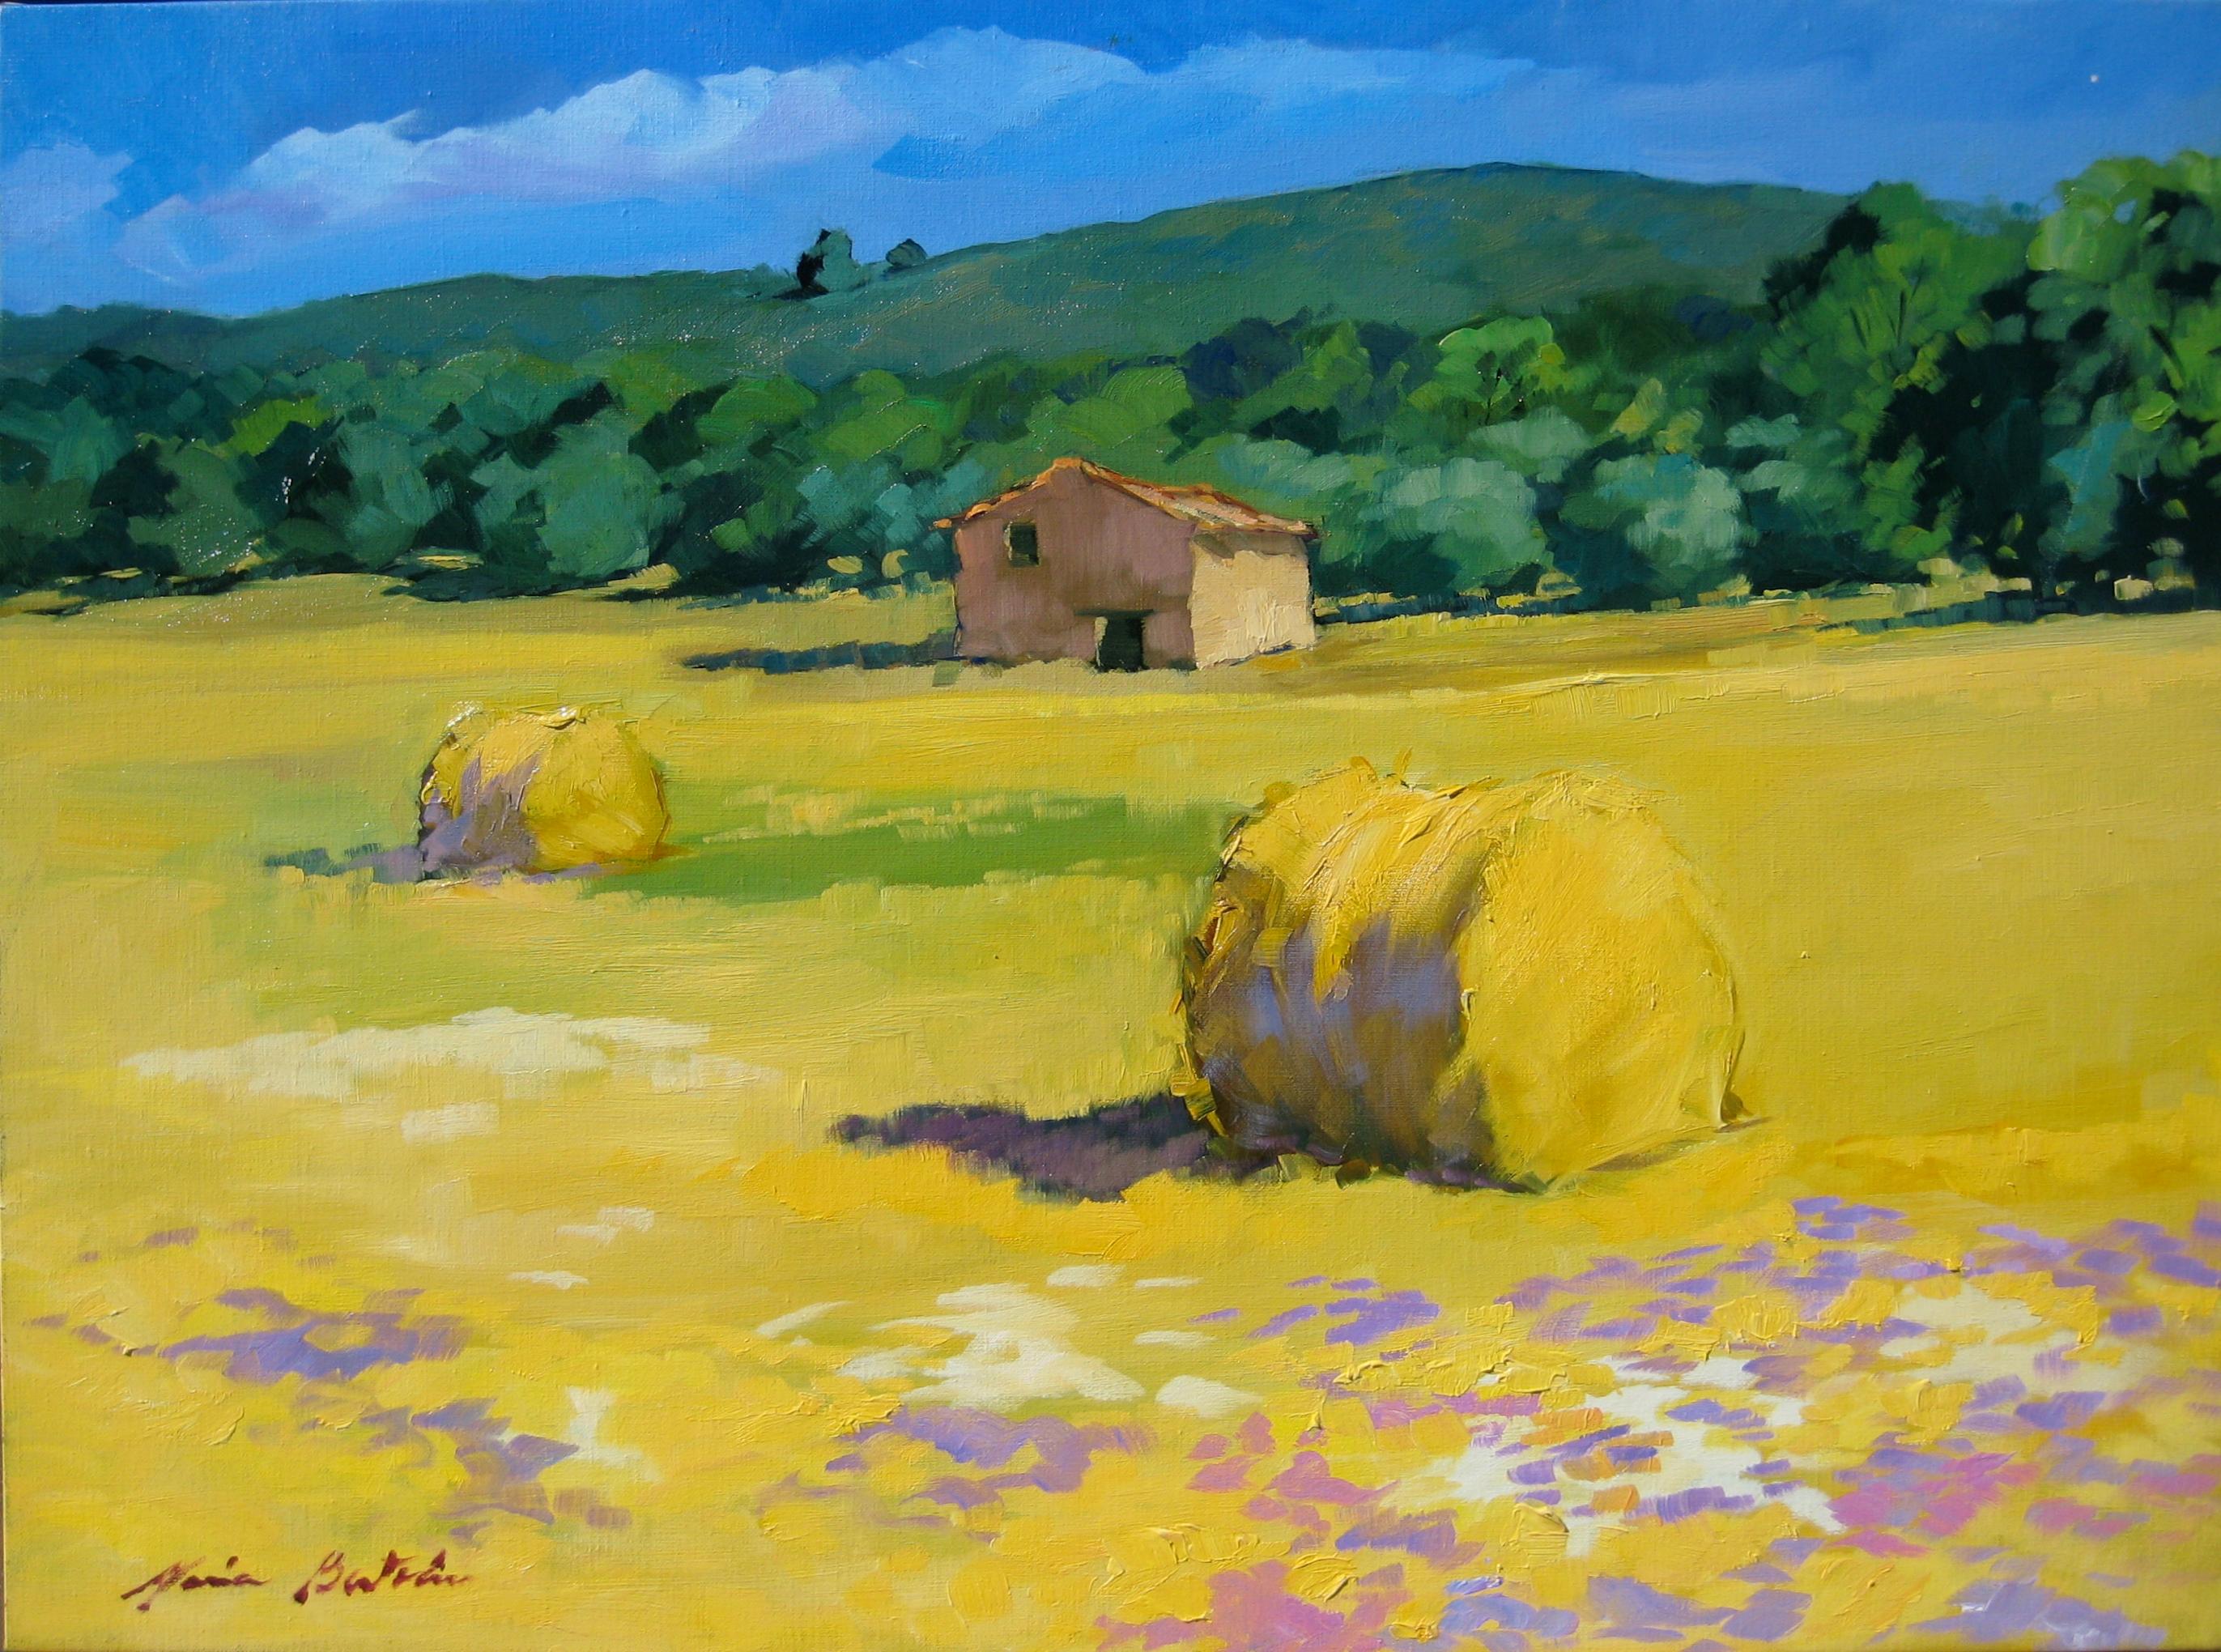 Maria Bertrán Landscape Painting - "Les Vieux Hay Rolls" Contemporary Impressionist Oil Painting by Maria Bertran